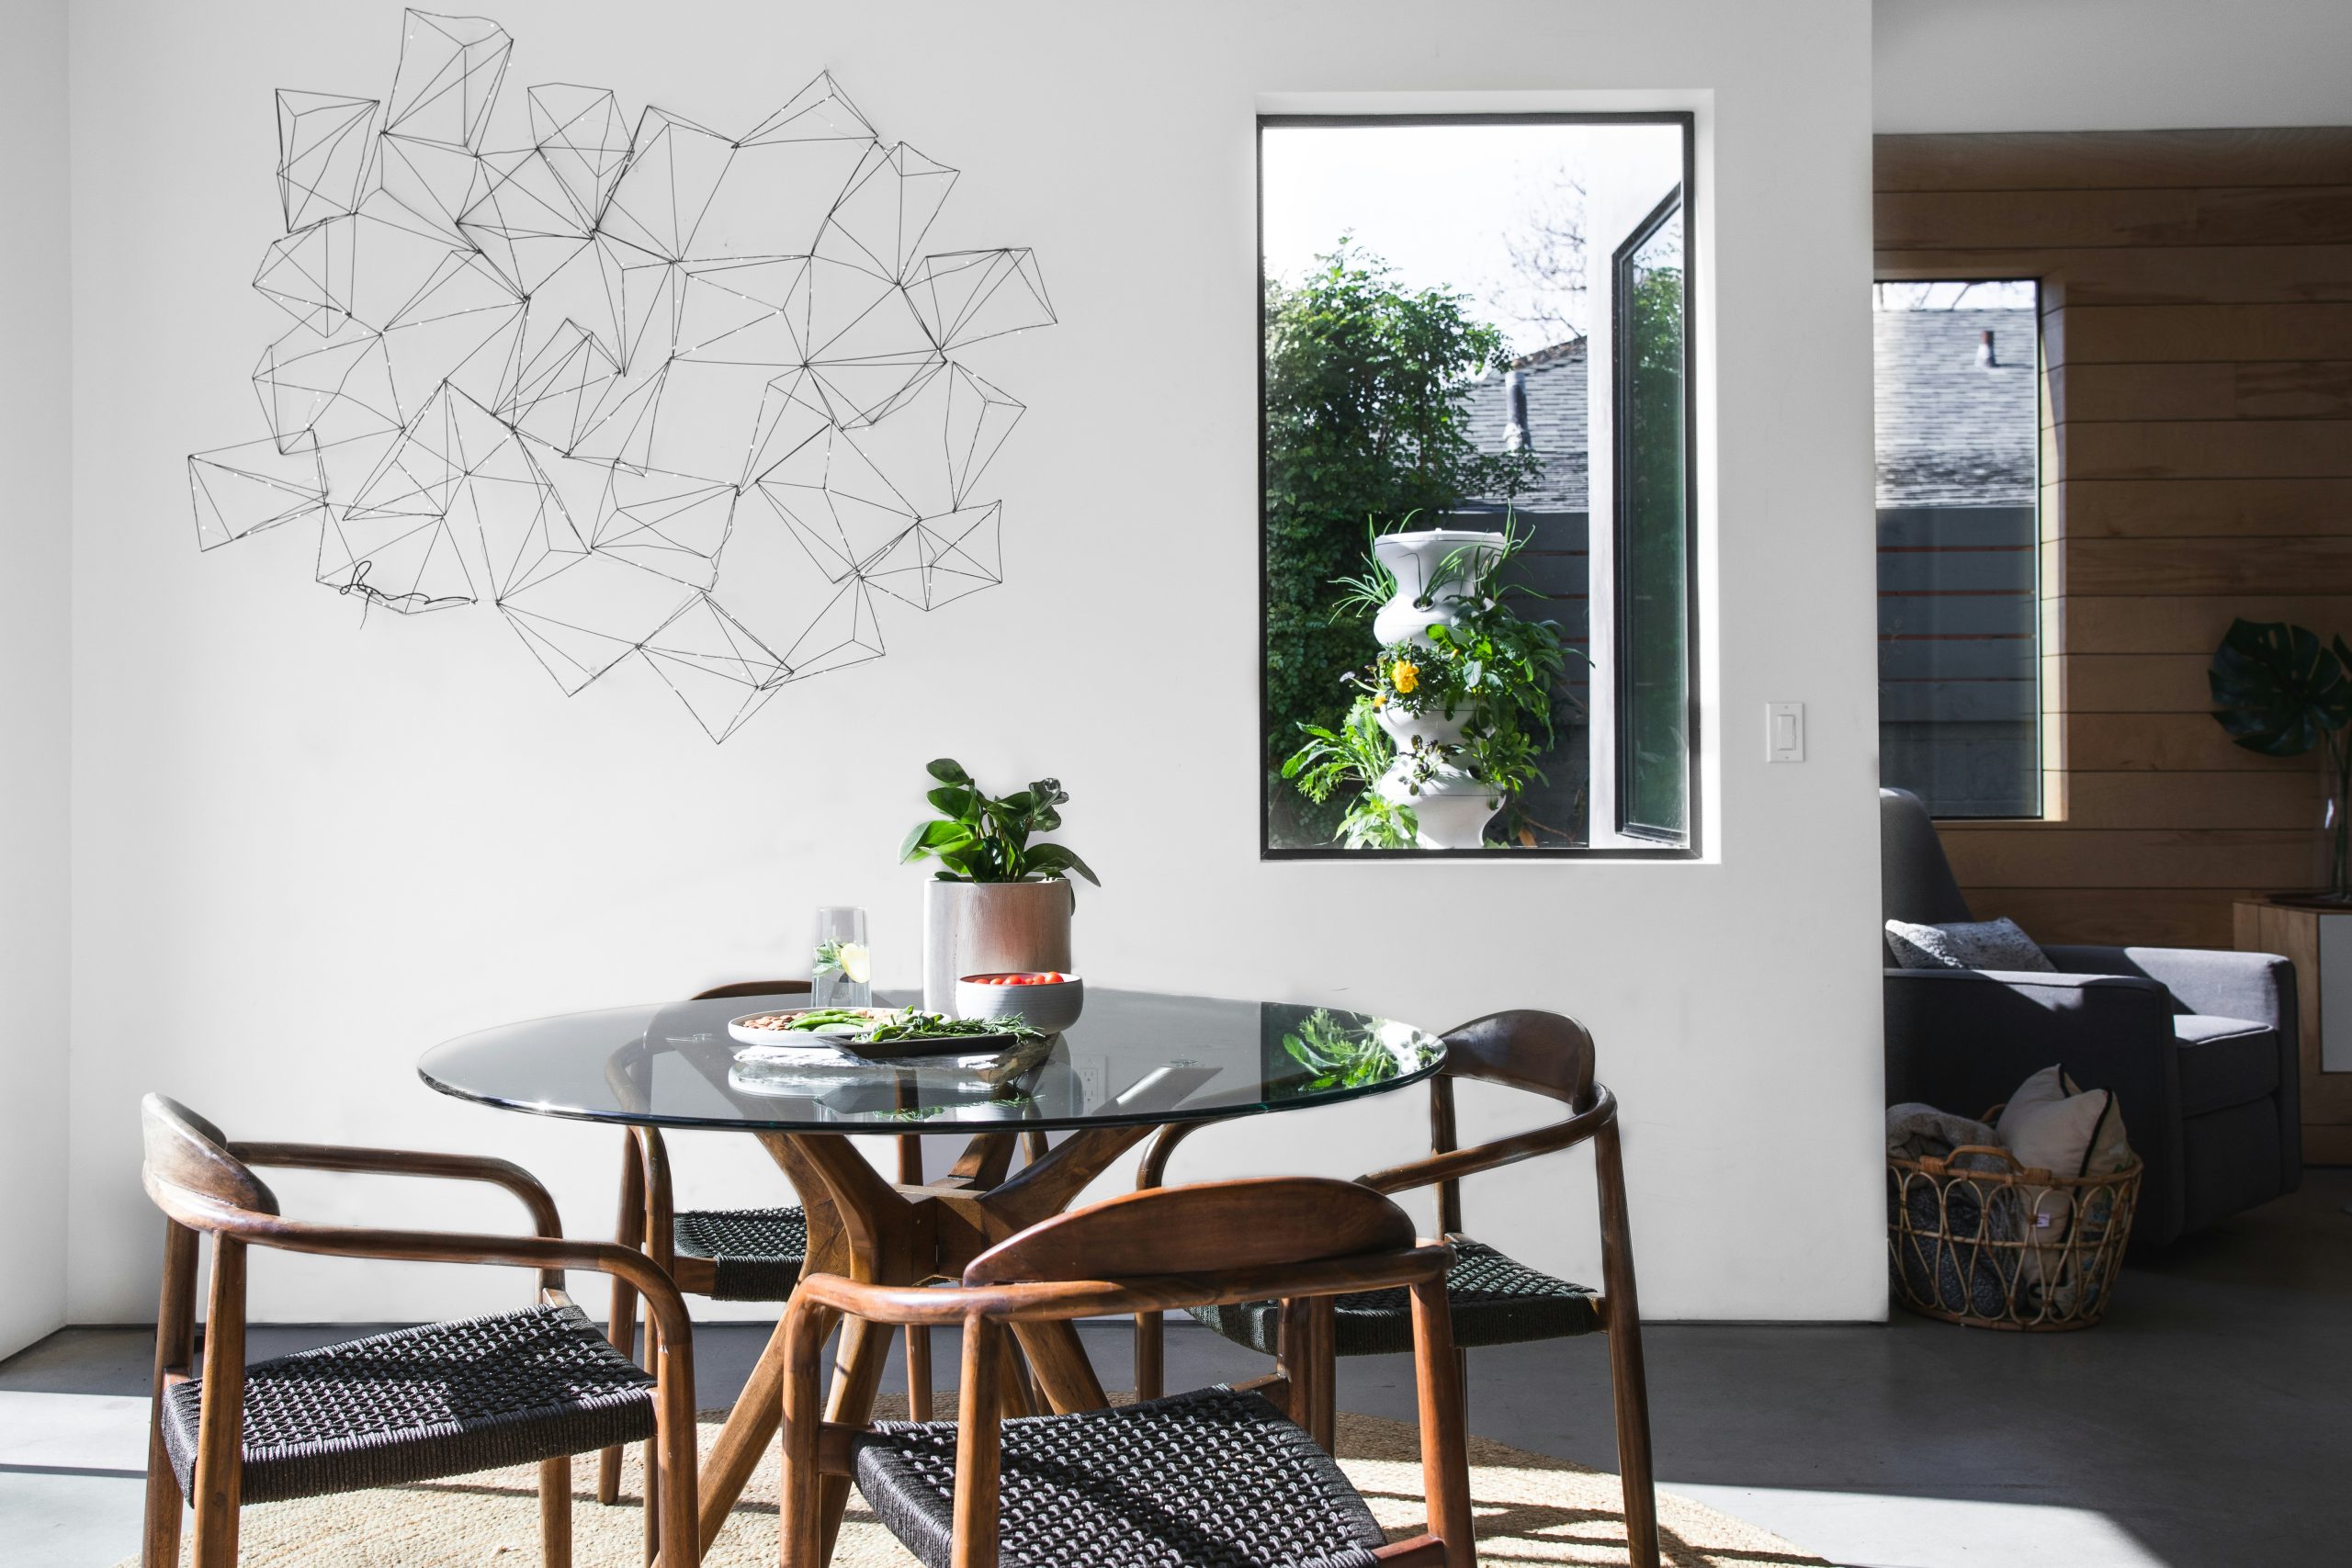 explore a wide range of elegant and functional dining tables to elevate your dining space. from modern minimalism to classic designs, find the perfect dining table for your home.